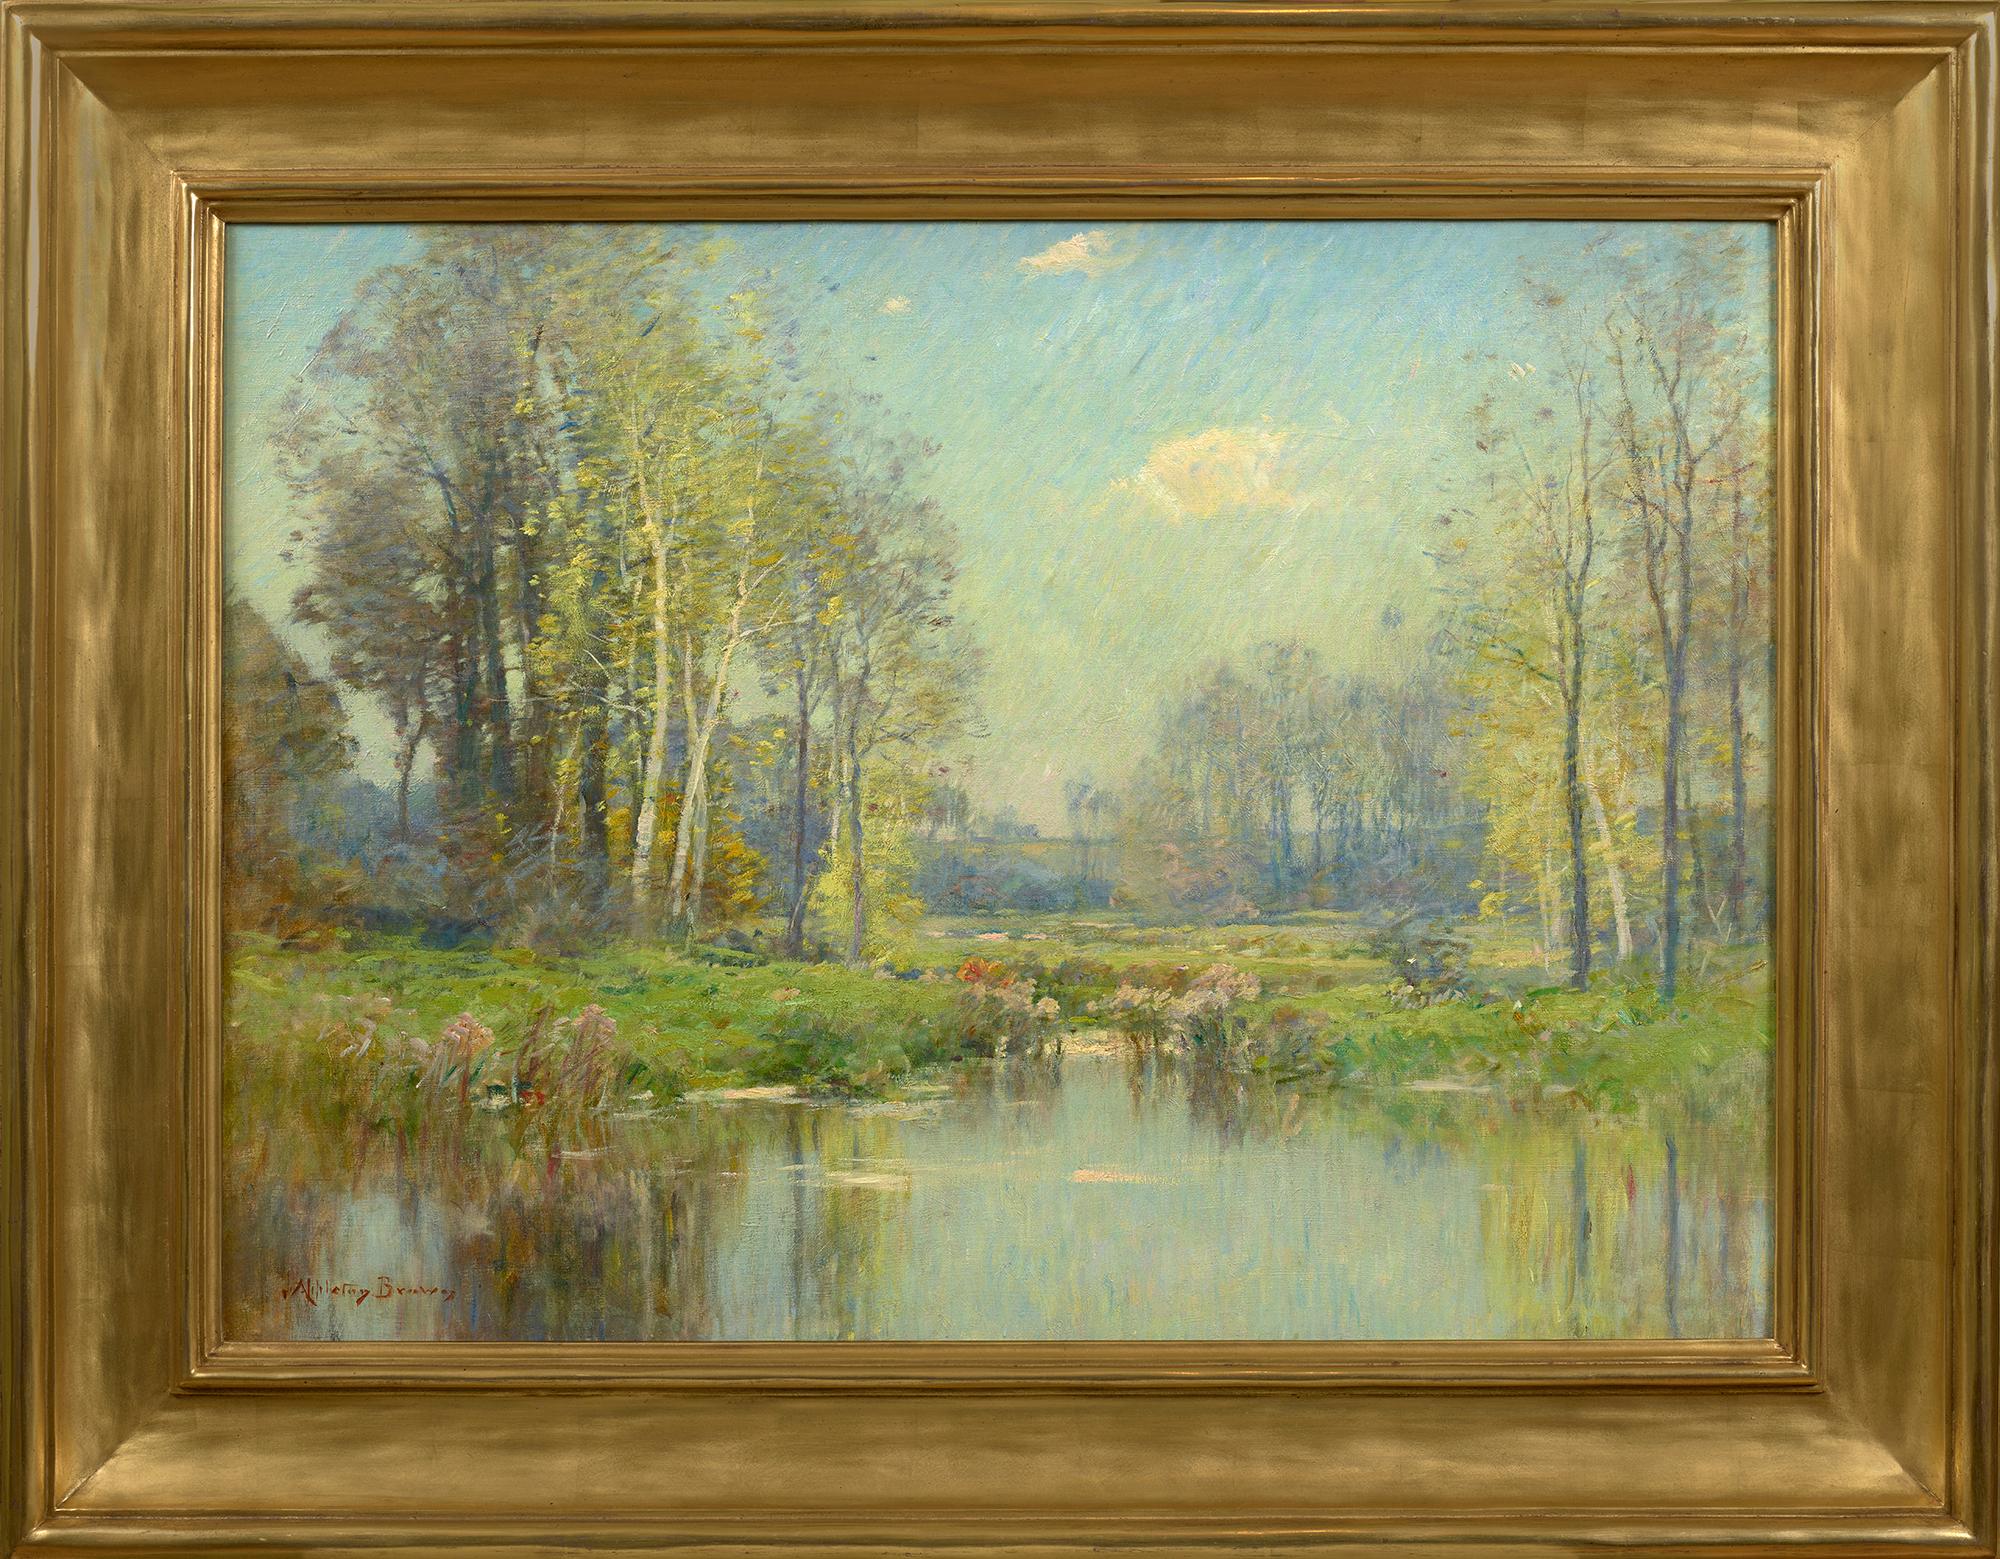 Wooded River Landscape - Painting by John Appleton Brown